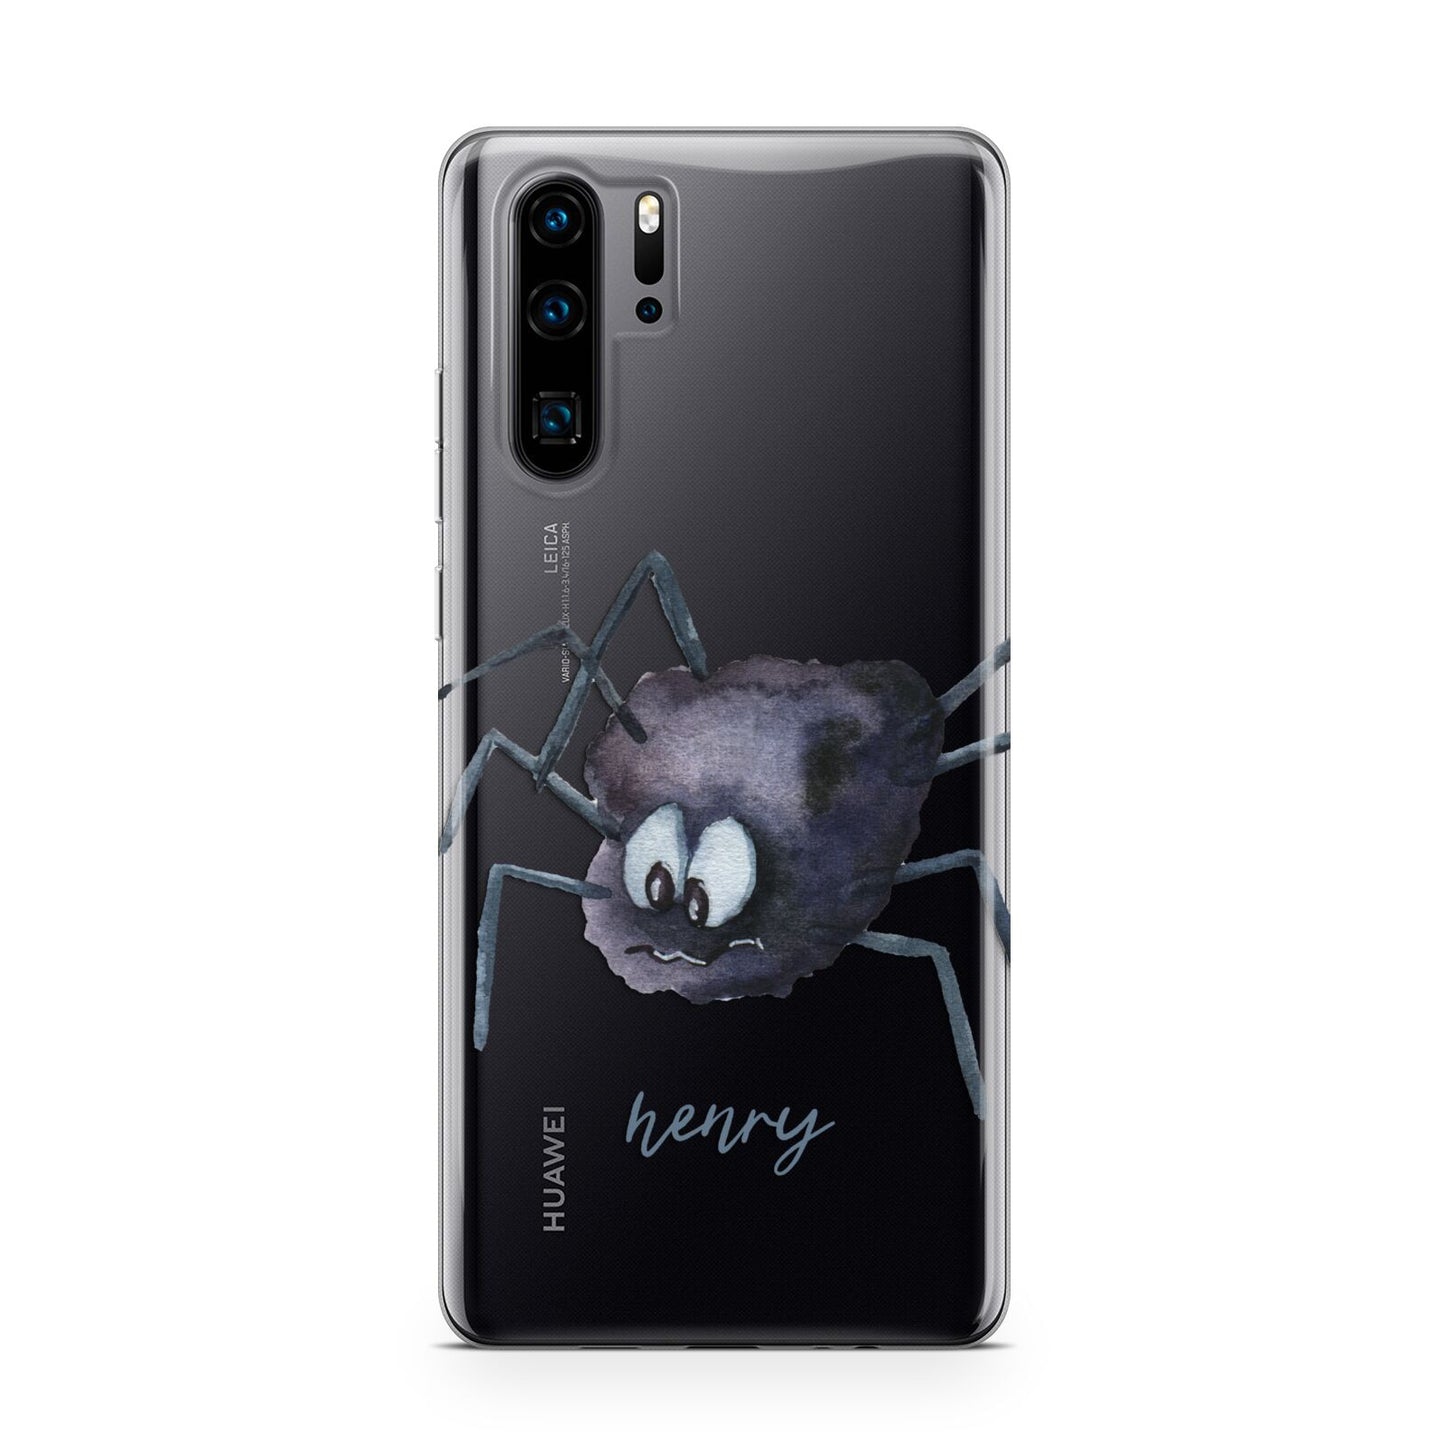 Scared Spider Personalised Huawei P30 Pro Phone Case